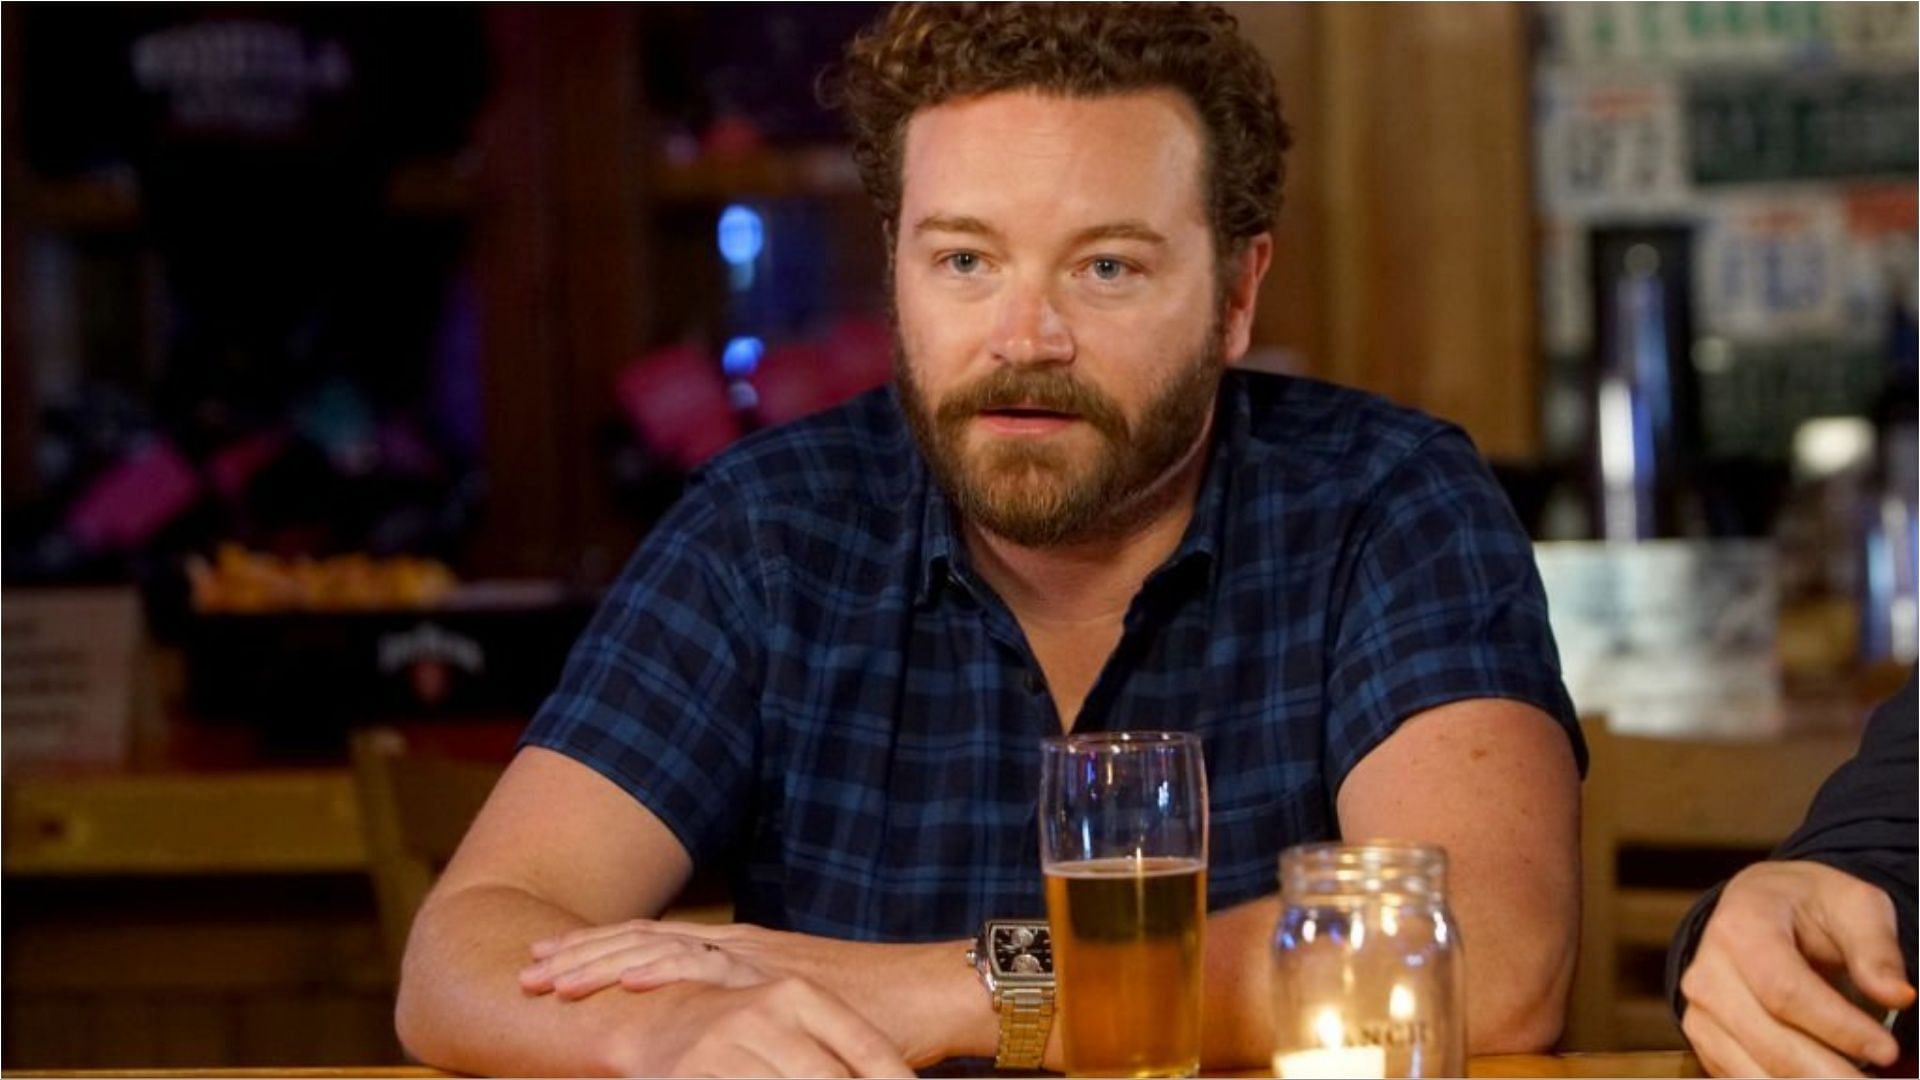 Danny Masterson has earned a lot from his successful career (Image via Anna Webber/Getty Images)